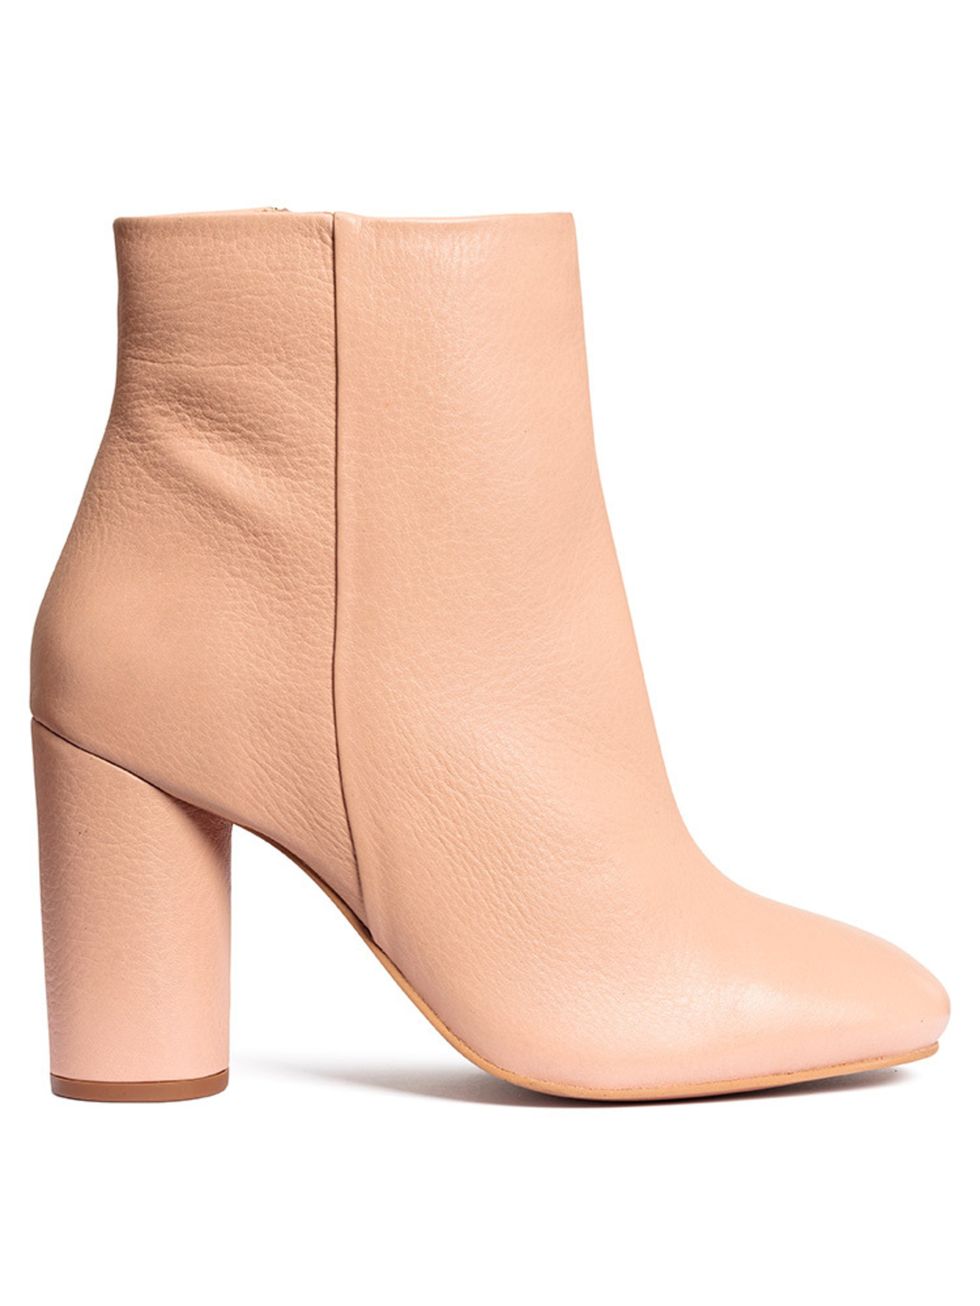 <p><a href="http://www.hm.com/gb/product/31700?article=31700-B" target="_blank">H&M boots</a>, £59.99</p>